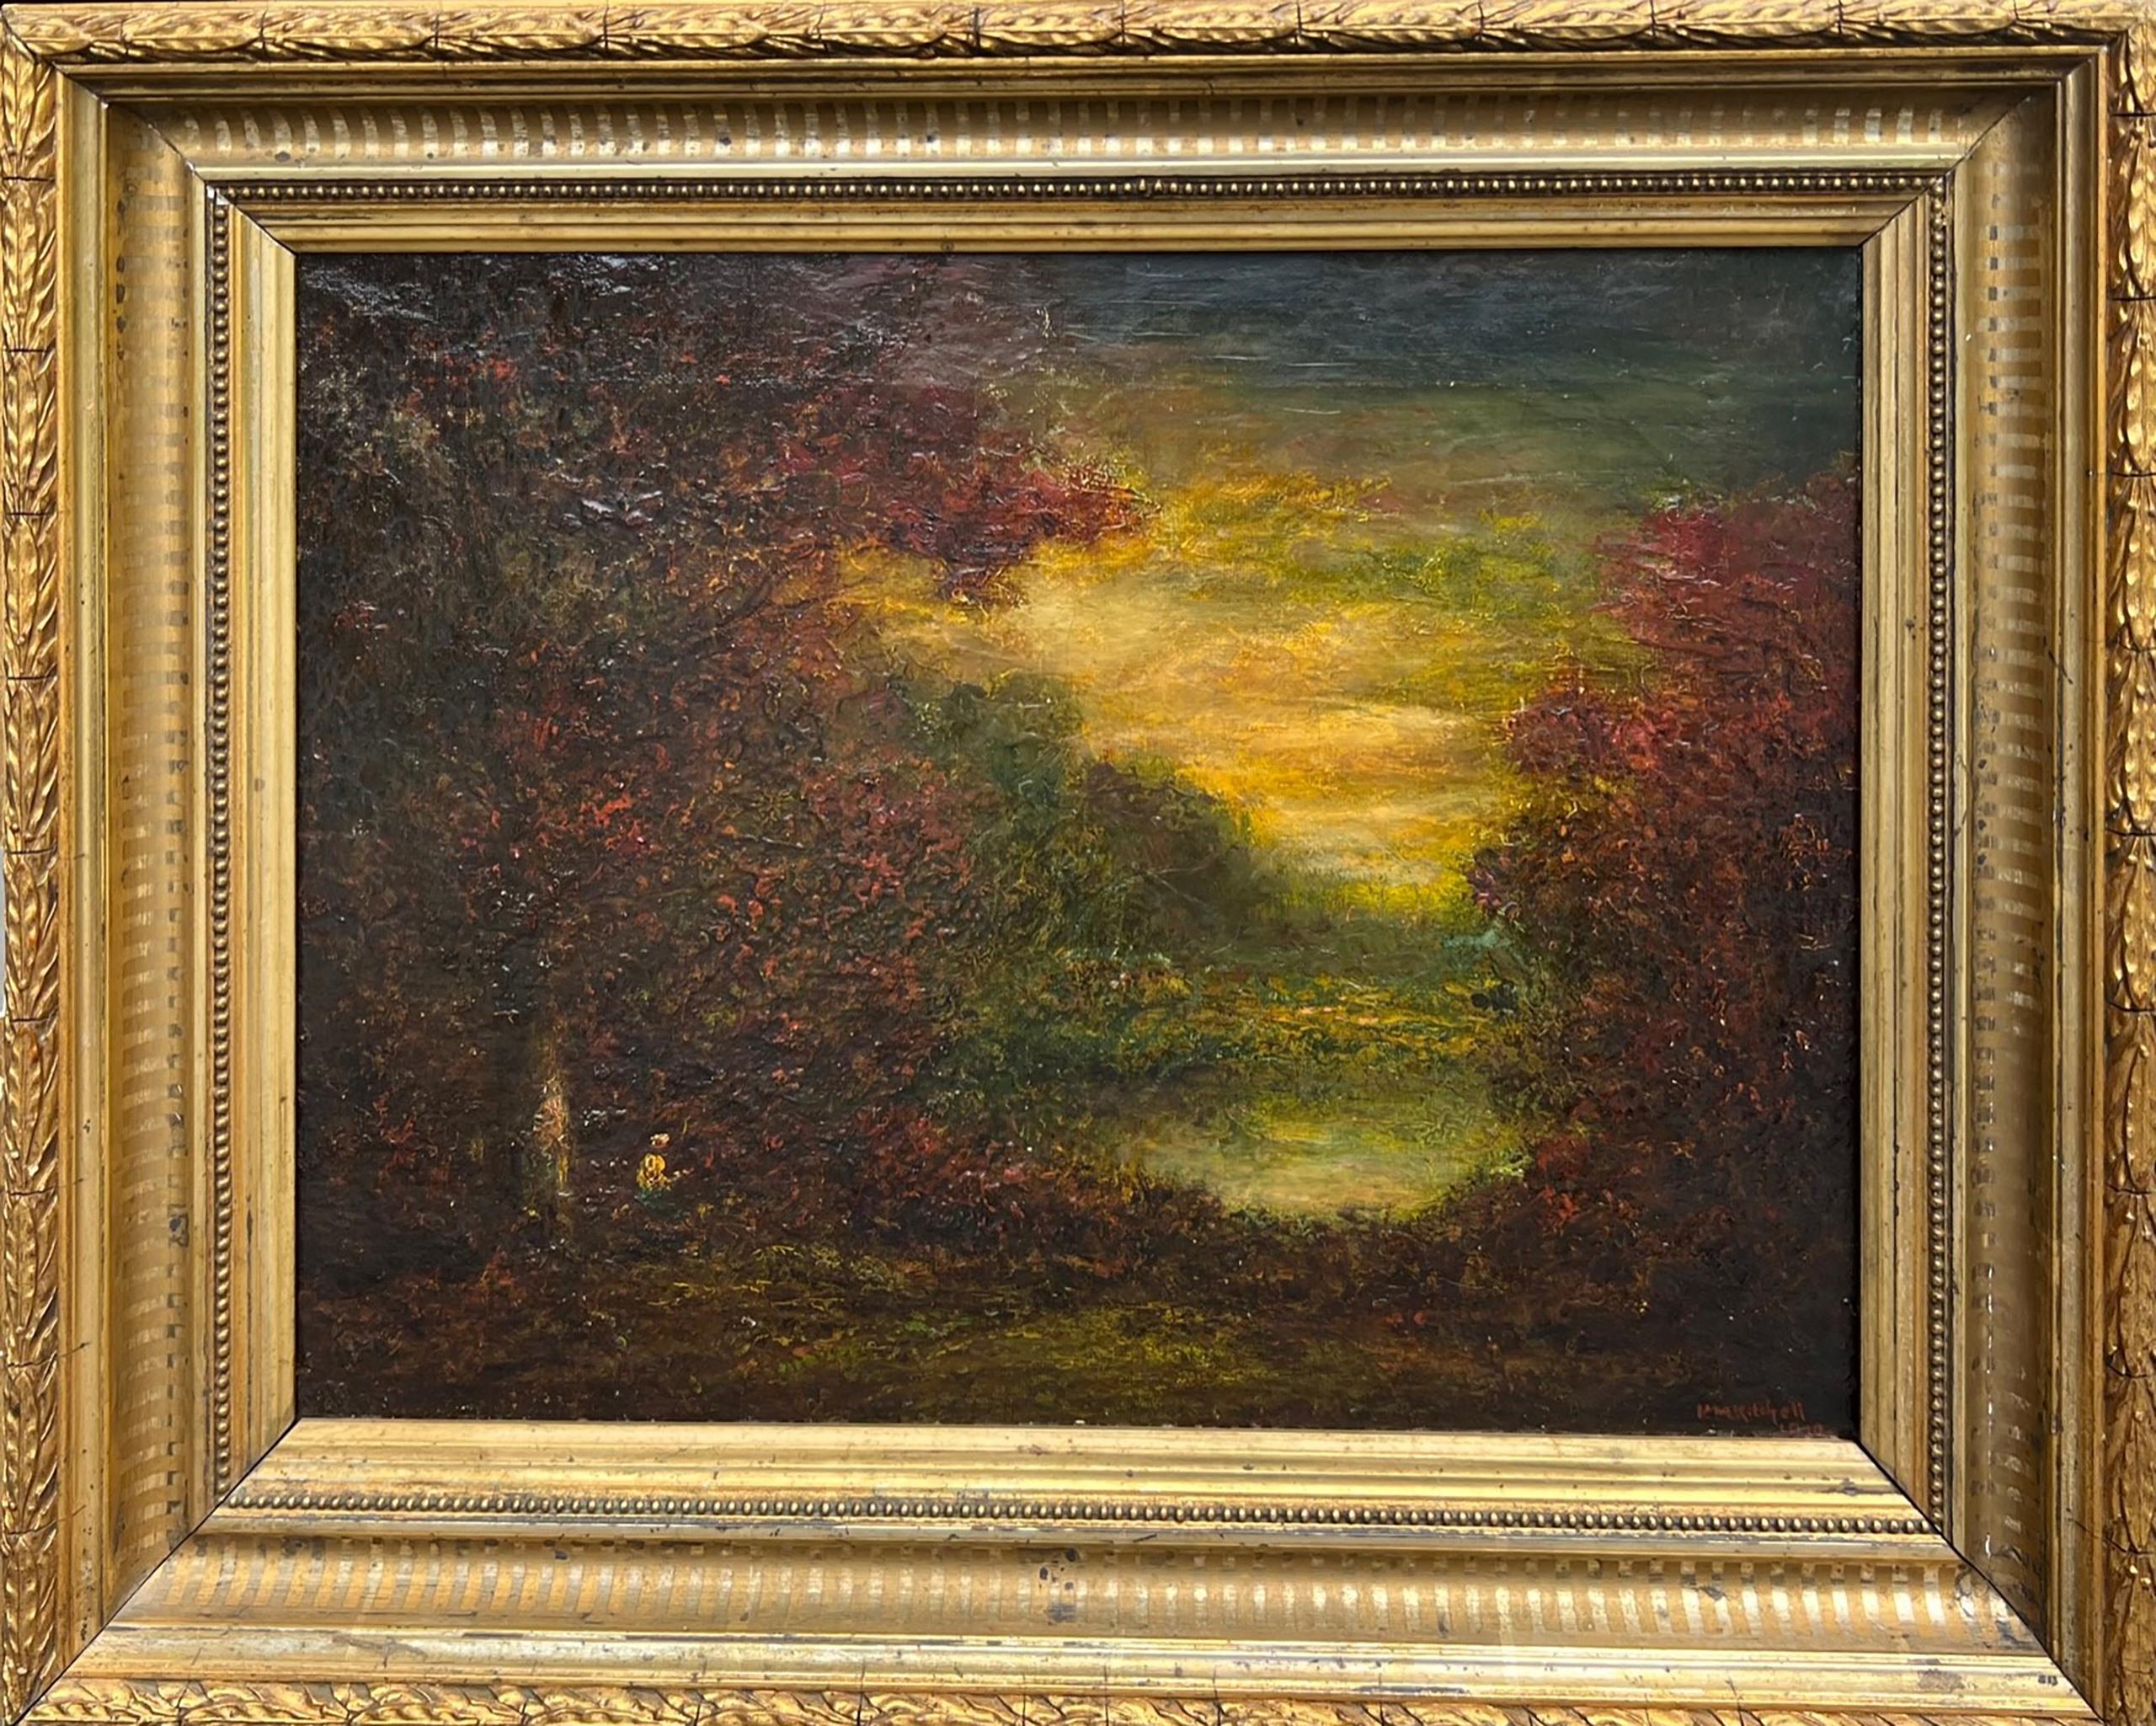 An early 20th century nocturne by Hudson Mindell Kitchell (1864-1944), Sunset, 1910 features a figure sitting beneath a tree beside a body of water that glimmers in the fading light.  It is signed by Kitchell and dated 1910 at lower right. The work